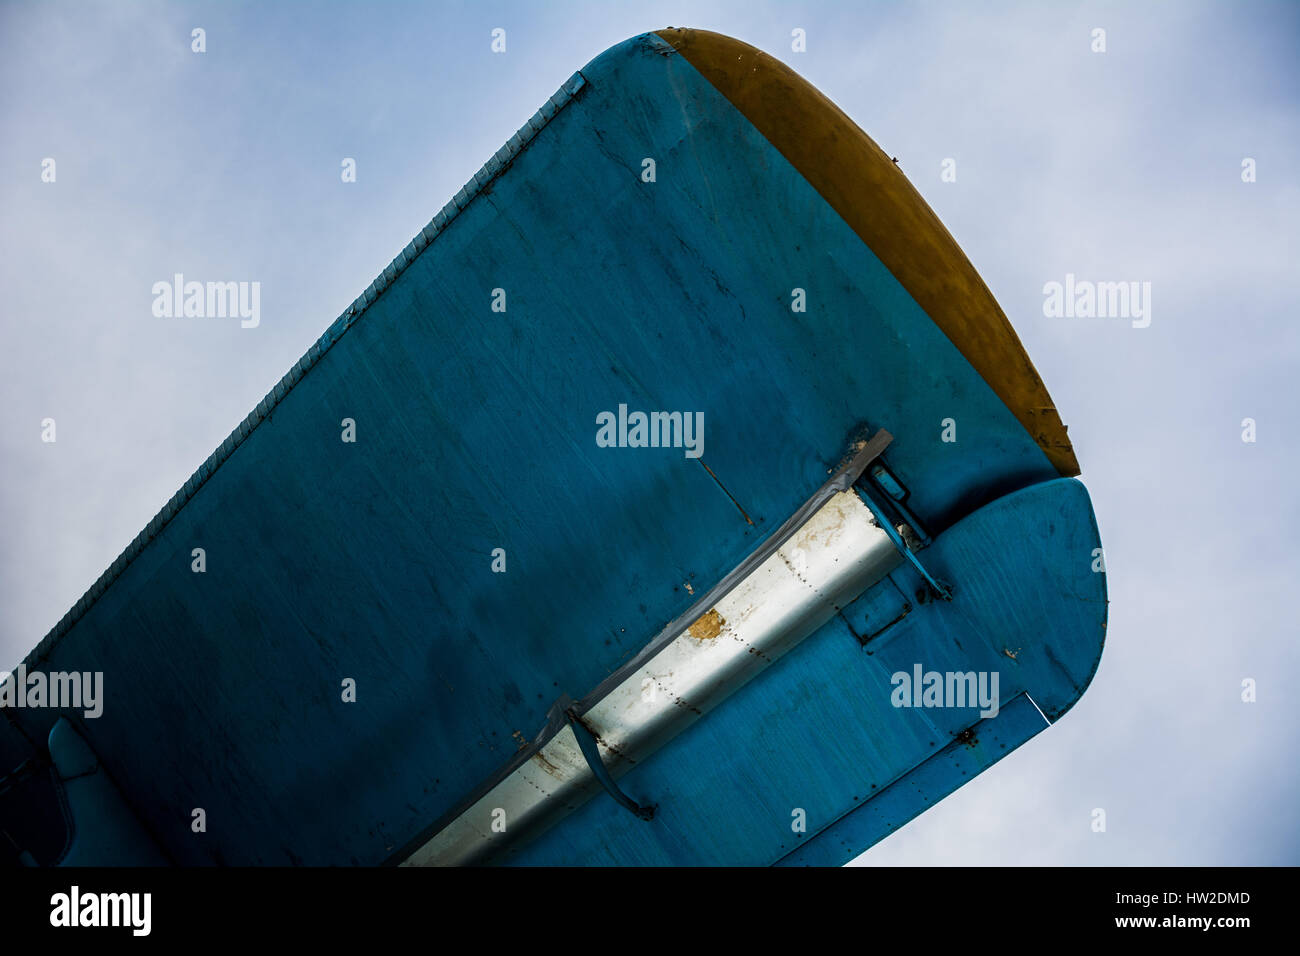 The wing of the Soviet AN-2 aircraft against the cloudy sky Stock Photo